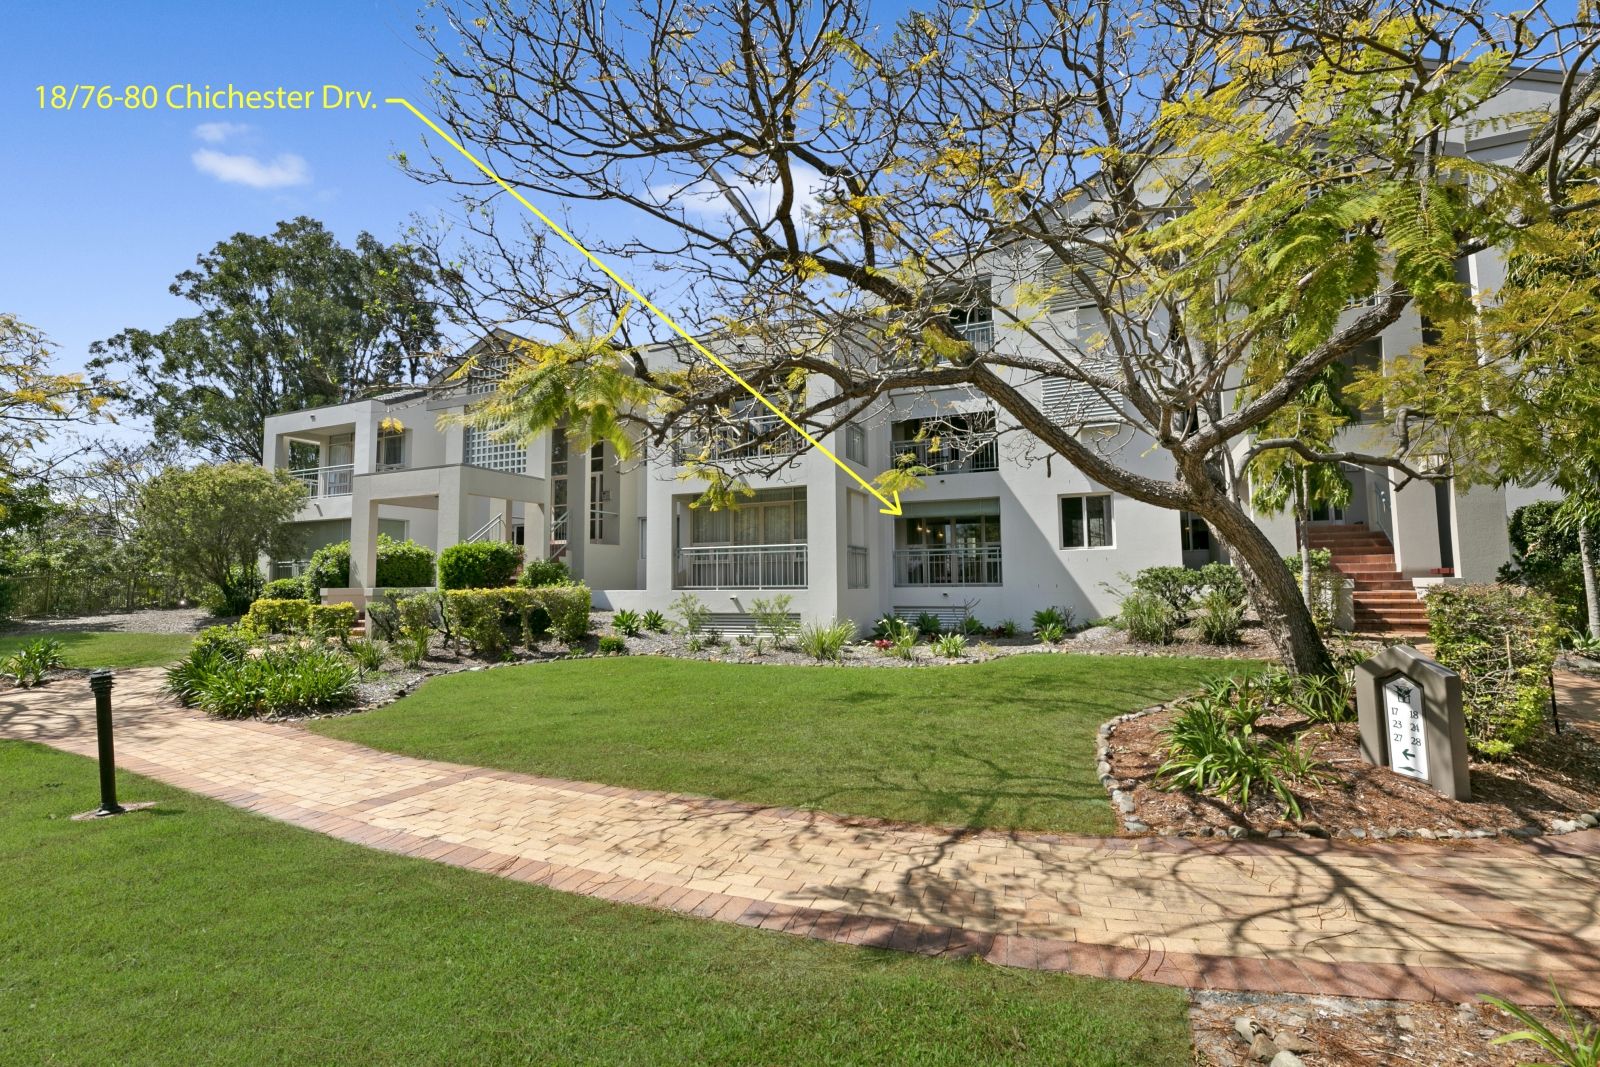 18/76-80 Chichester Drive, Arundel QLD 4214, Image 0